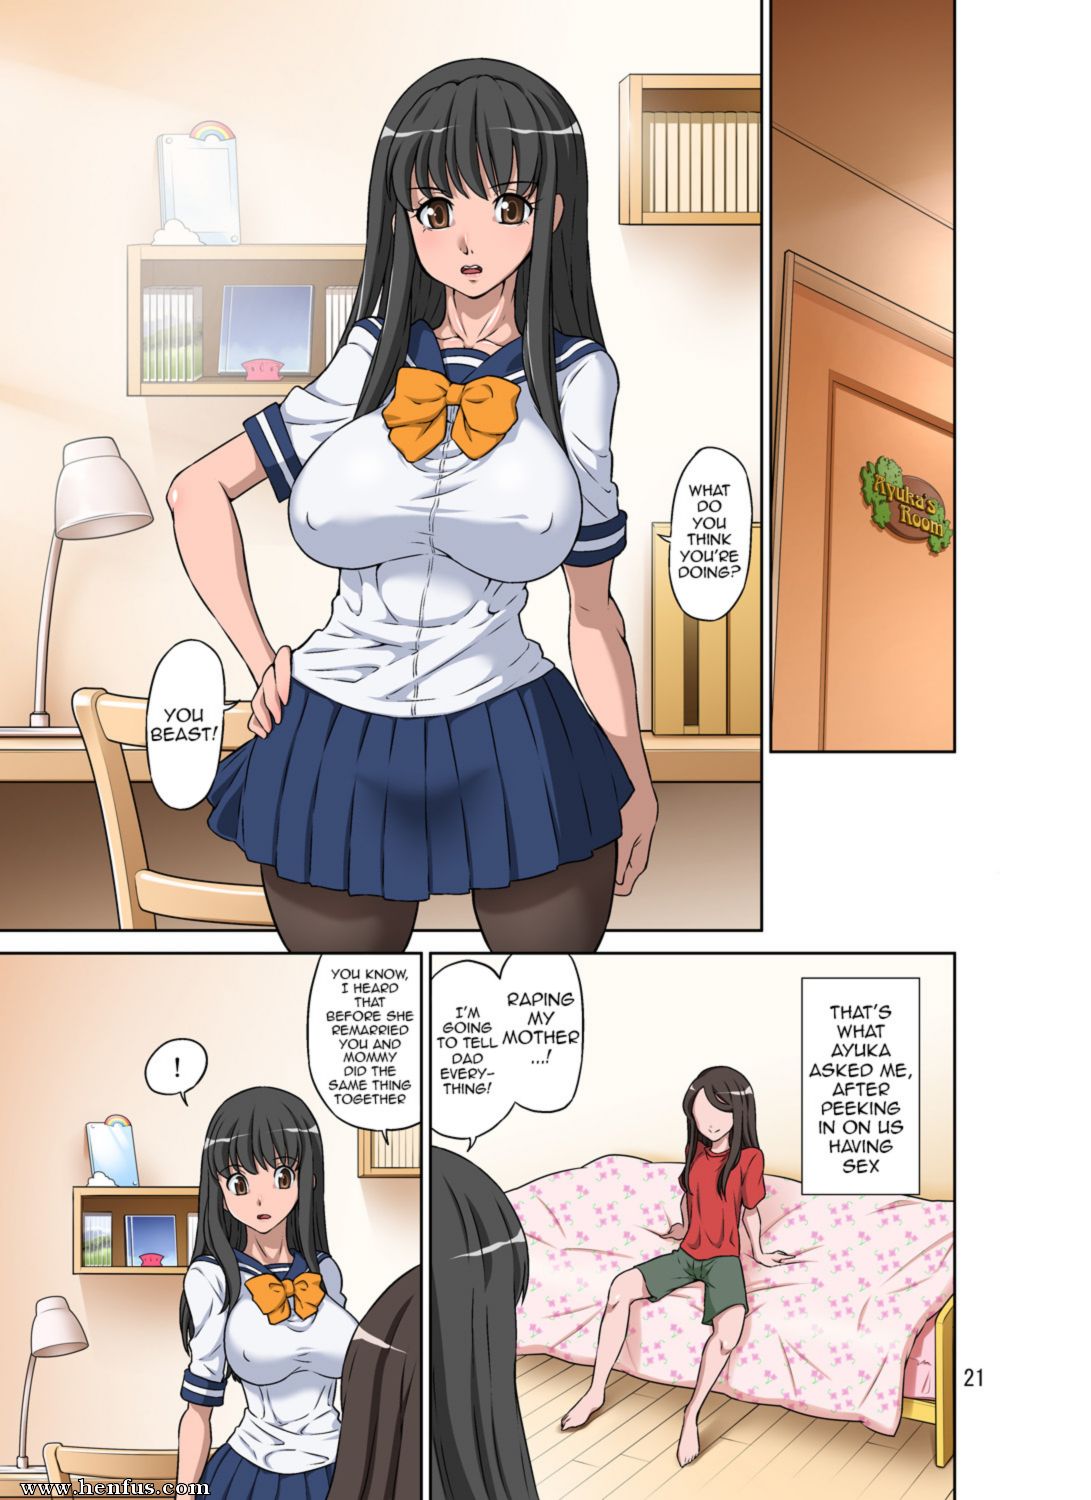 Anime Shemale Daughter Porn - Page 22 | Dozamura/Story-of-shemale-daughter-and-mother | Henfus - Hentai  and Manga Sex and Porn Comics